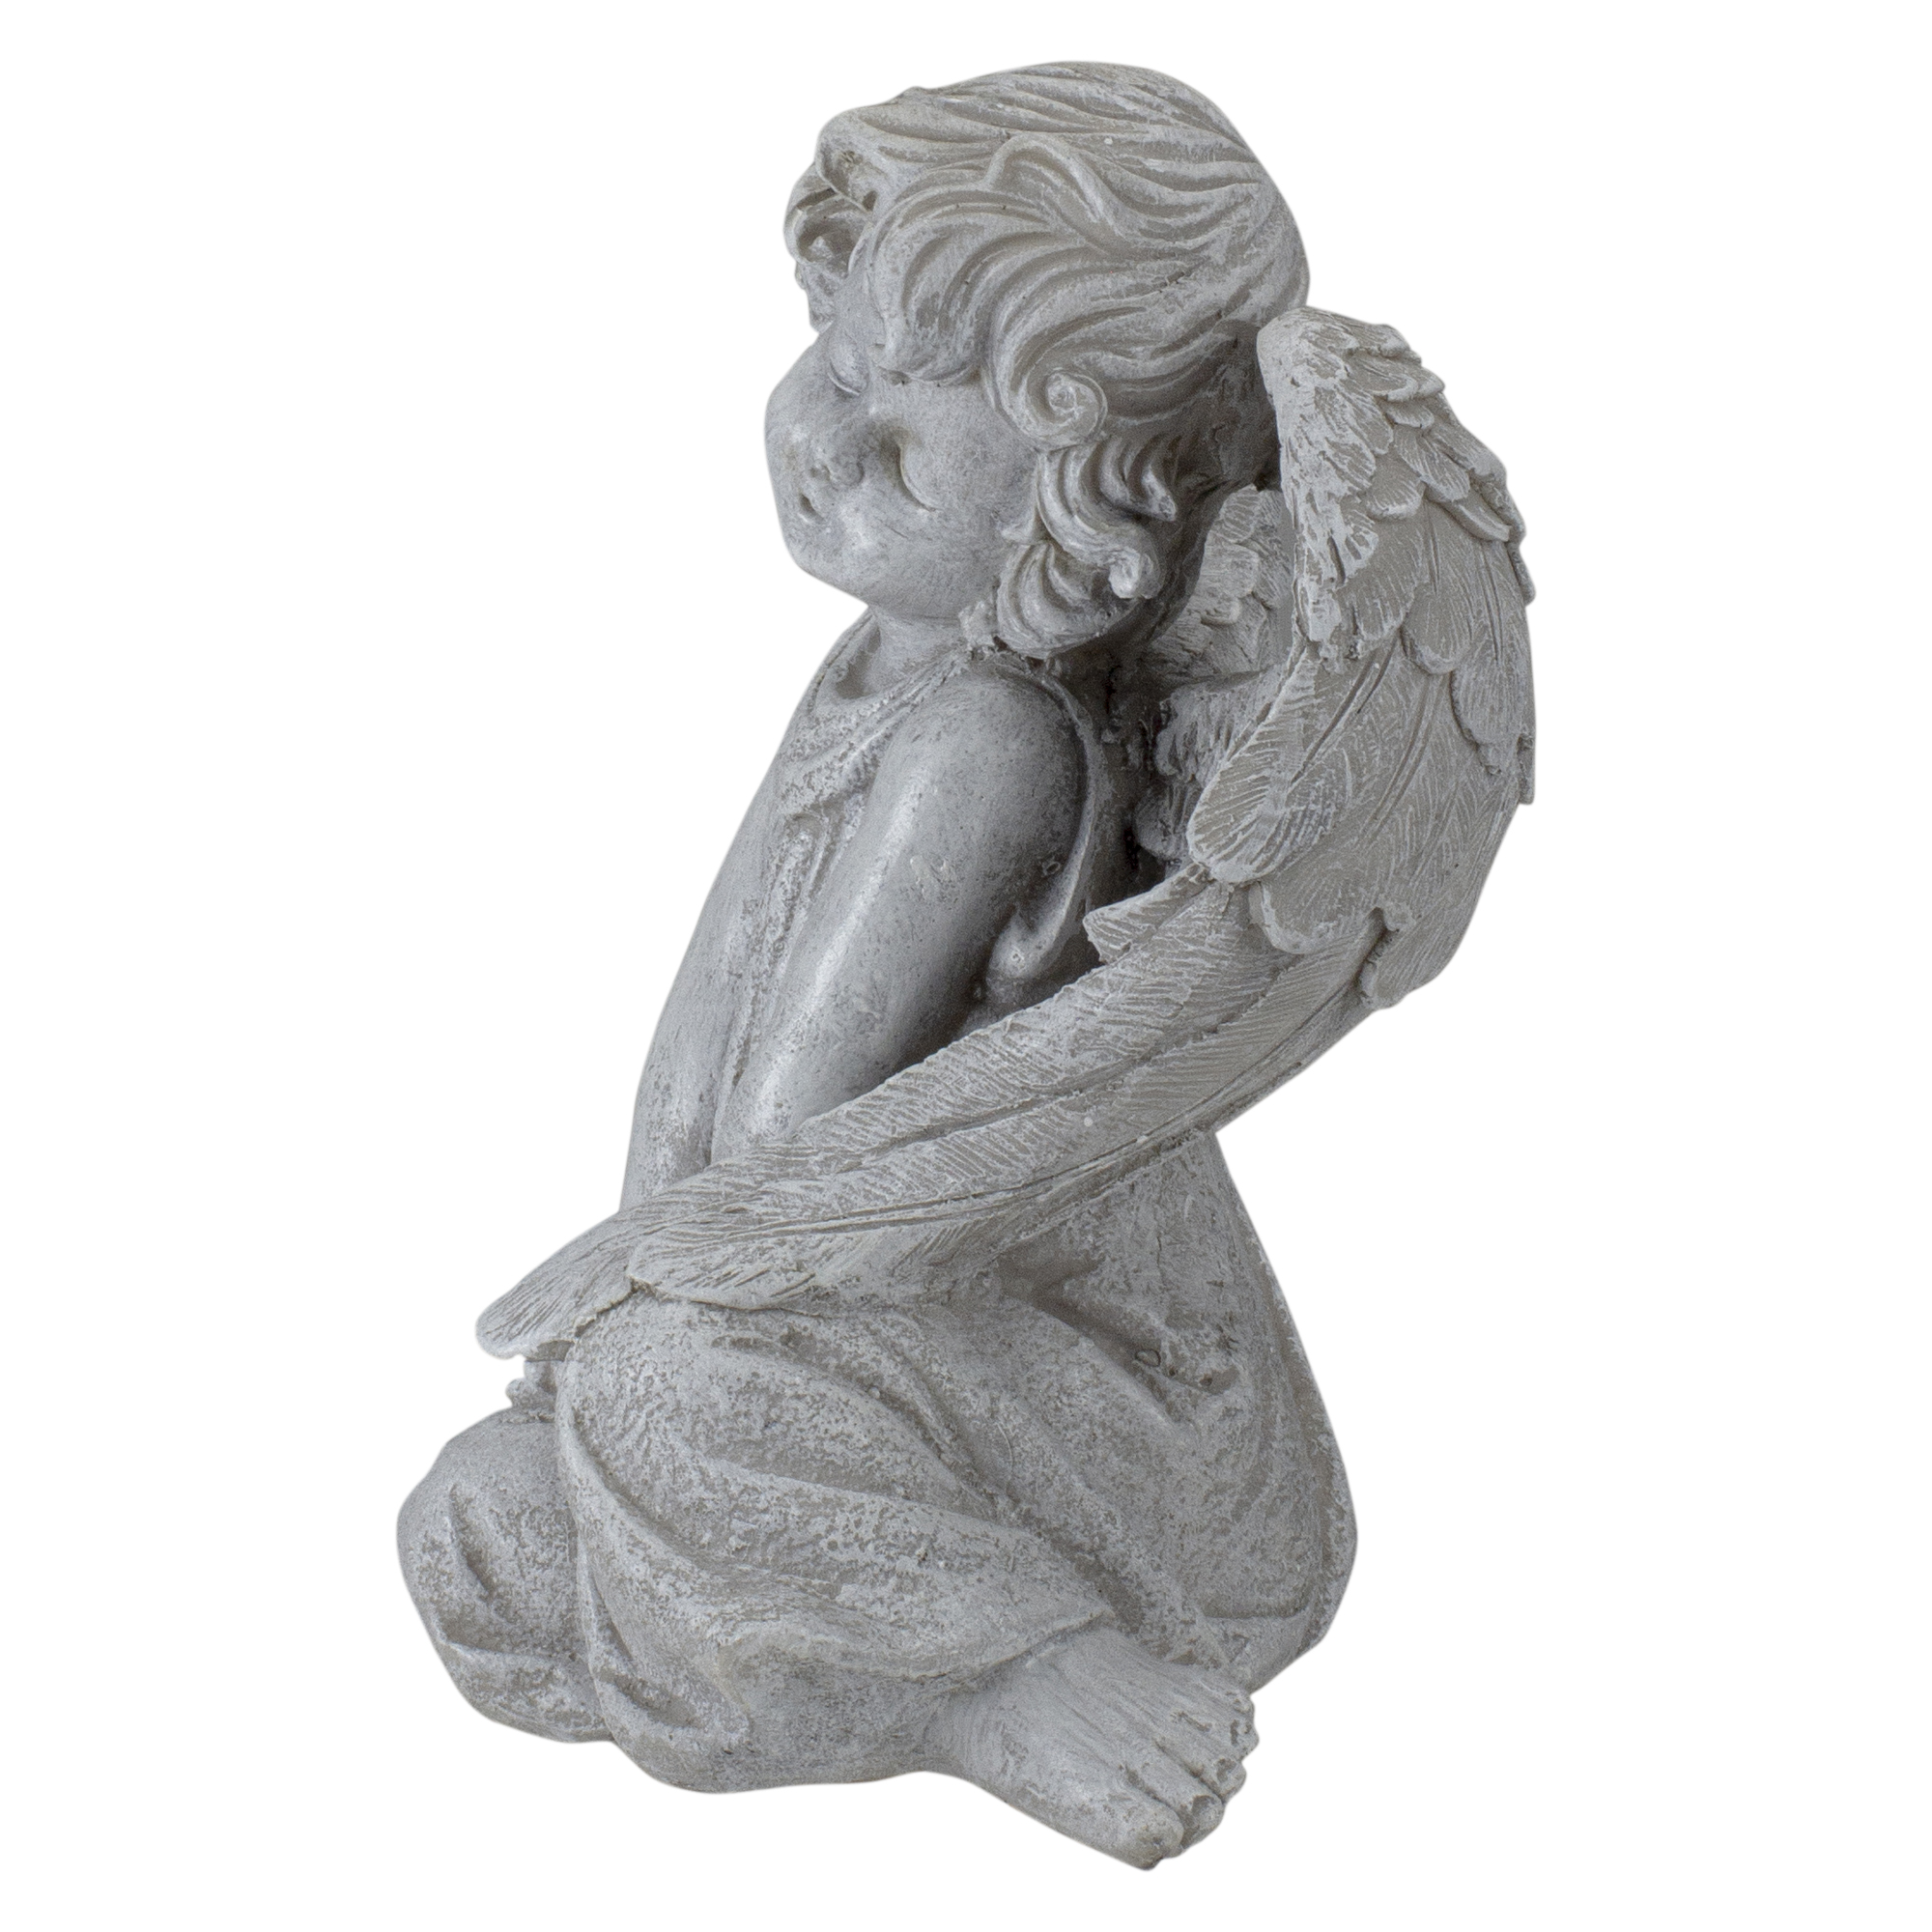 Northlight 8.75" Gray Sitting  Angel with Wings Outdoor Garden Statue - image 5 of 5